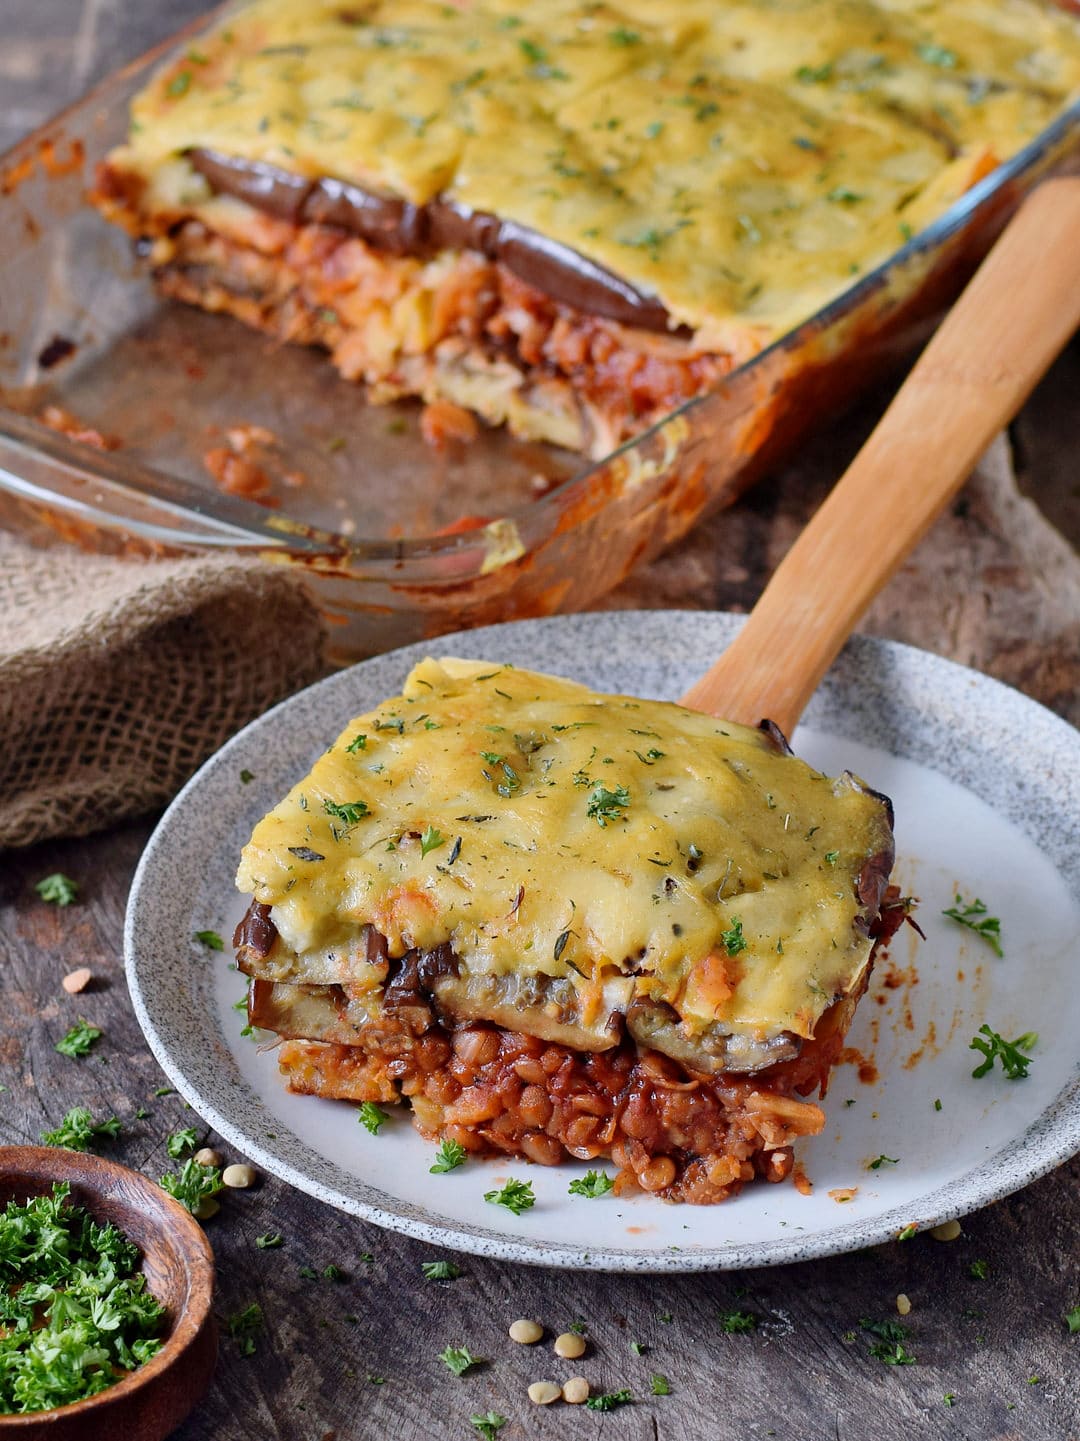 gluten-free vegan moussaka on a plate with a wooden spatula